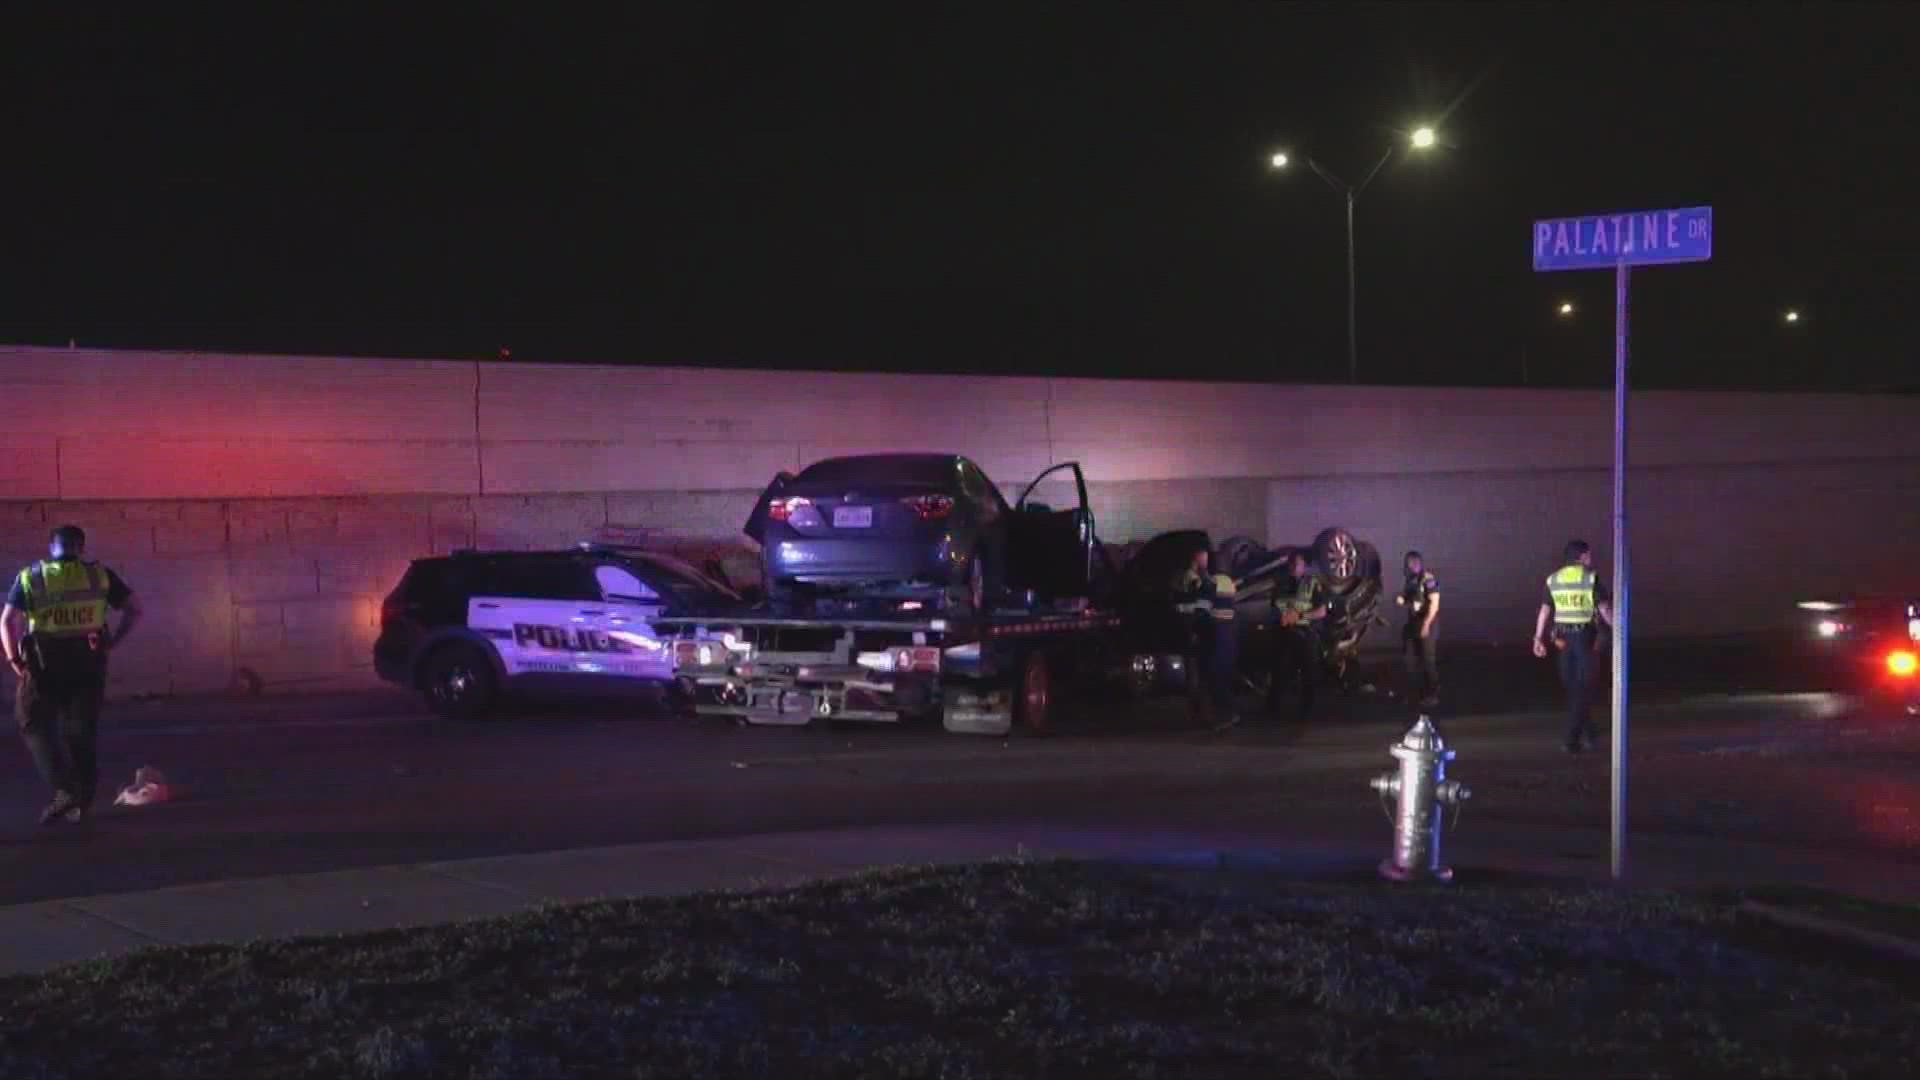 While traffic was blocked, SAPD said the officer responding to the incident was driving at high speeds over a hill when they crashed into the tow truck.